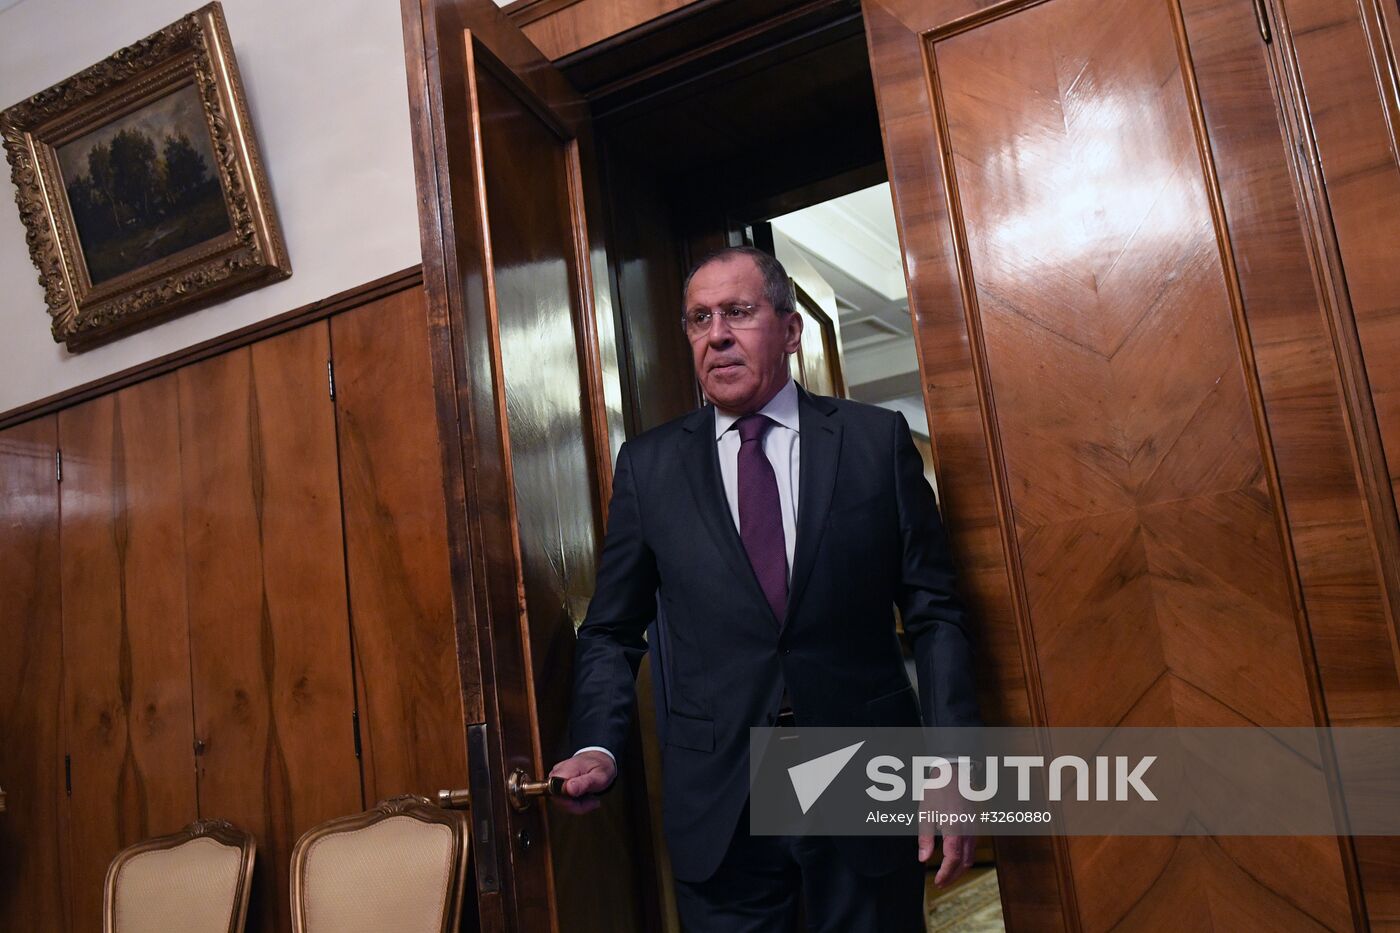 Russian Foreign Minister Sergei Lavrov meets with Serbian Foreign Minister Ivica Dacic